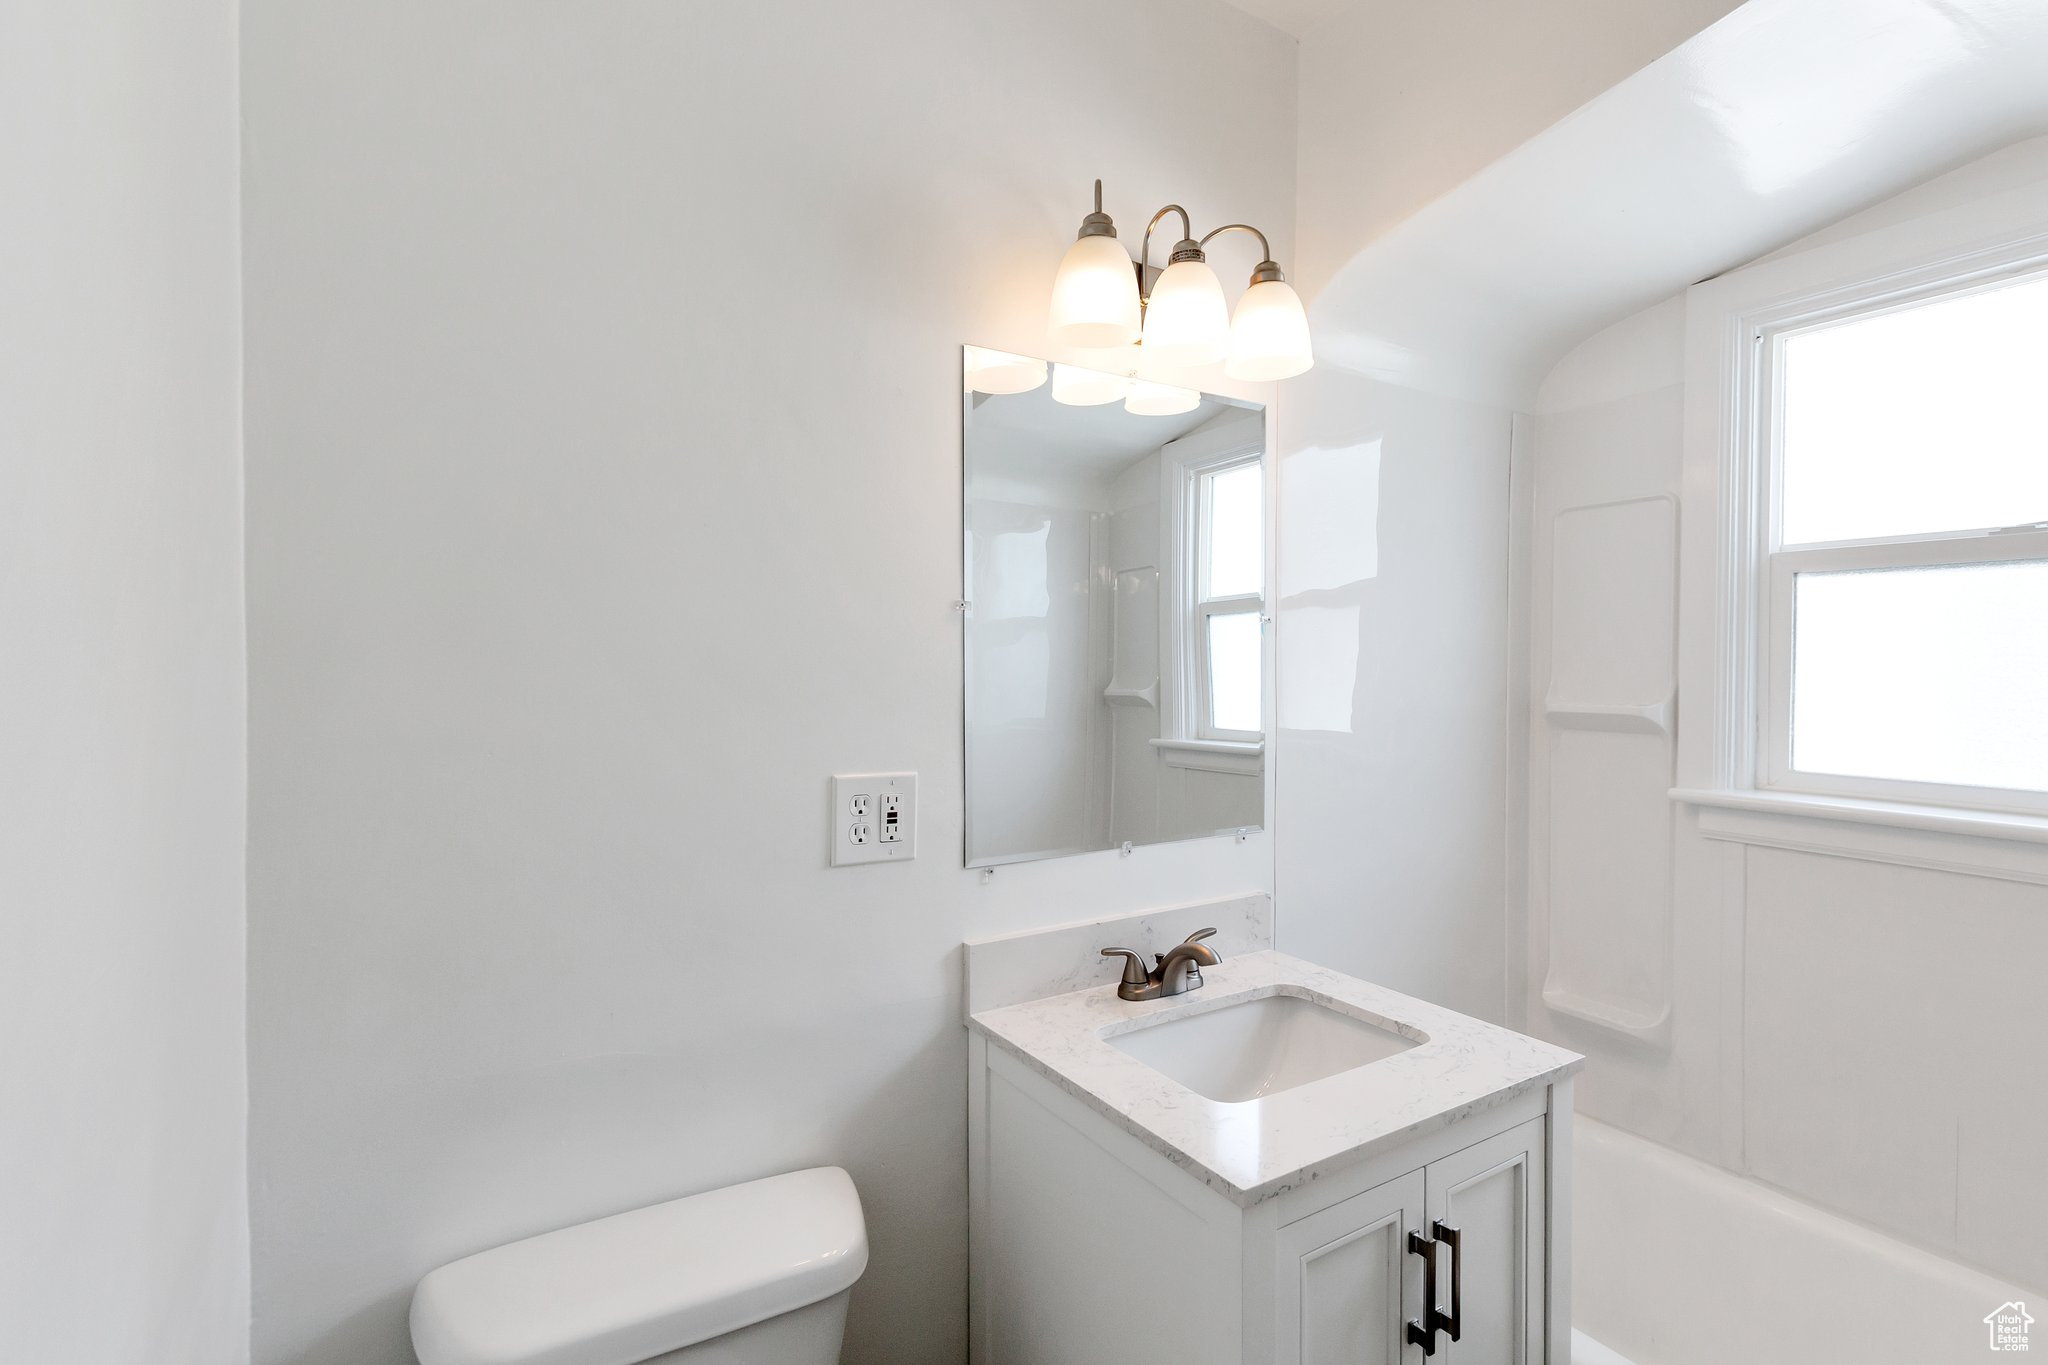 Full bathroom with a healthy amount of sunlight, toilet, shower / bathing tub combination, and large vanity